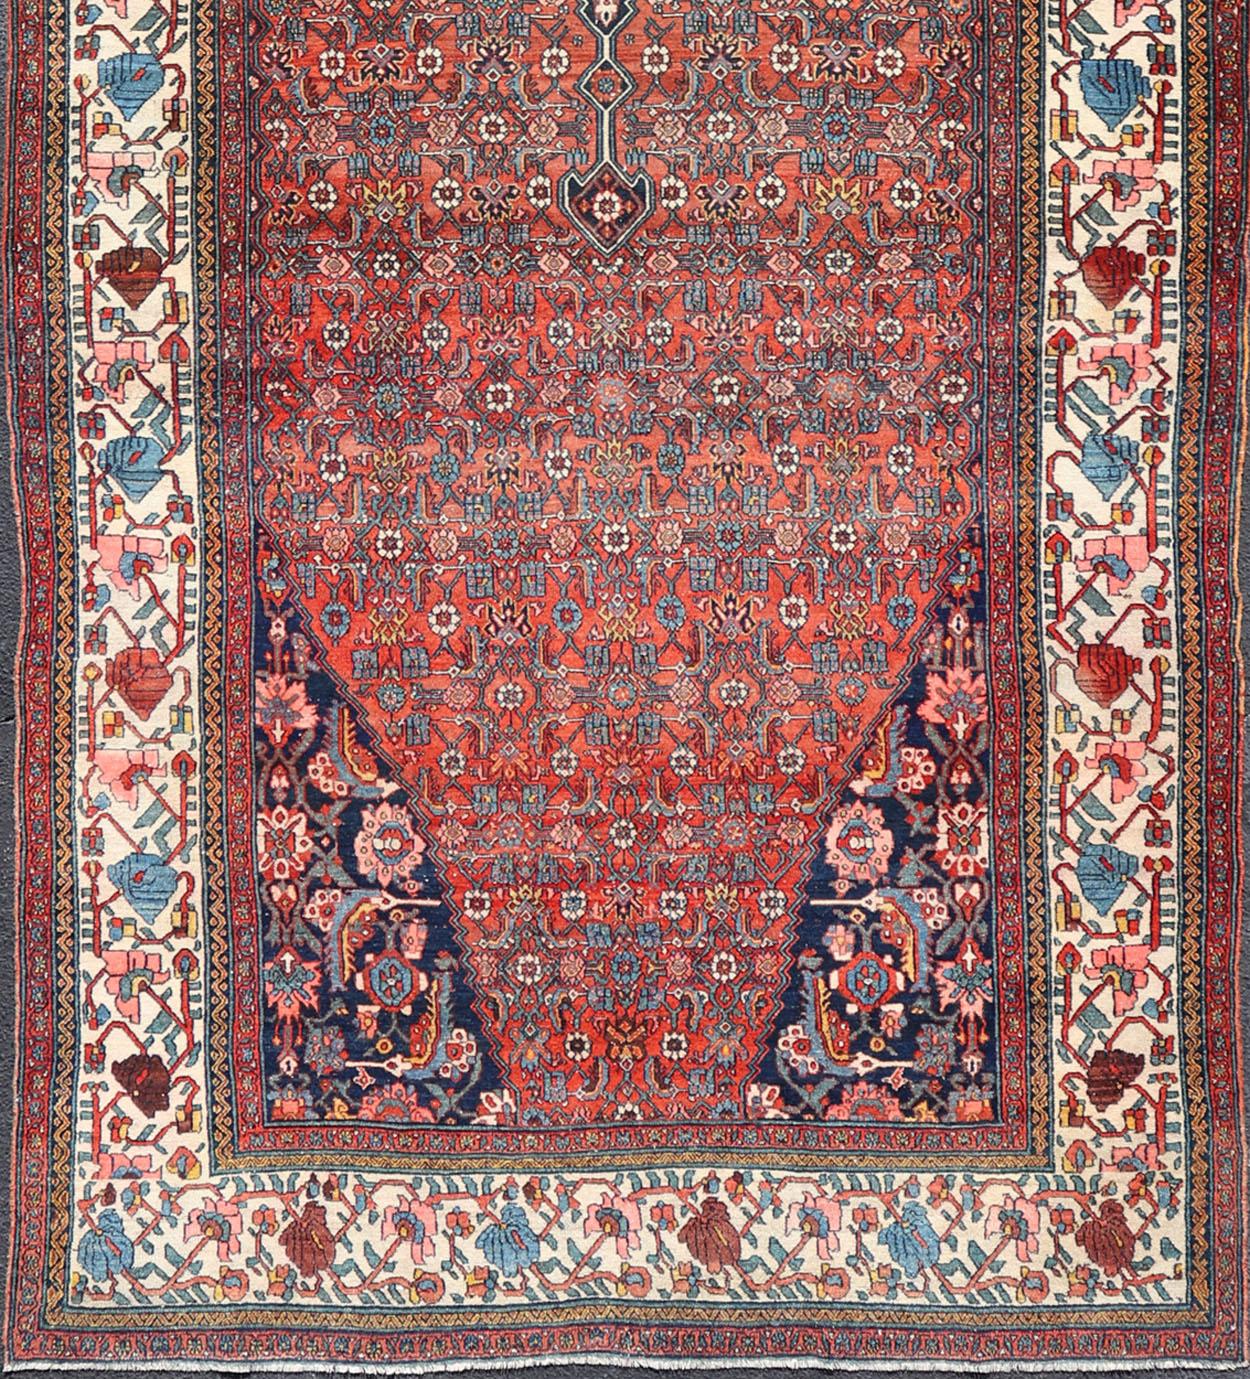 Finely woven sub geometric pattern Bibikabad antique Persian large gallery runner rug in rich blue, brick red and multi colors, rug R20-0902, country of origin / type: Iran / Bibikabad, circa 1920.

This spectacular antique Persian Khorasan carpet